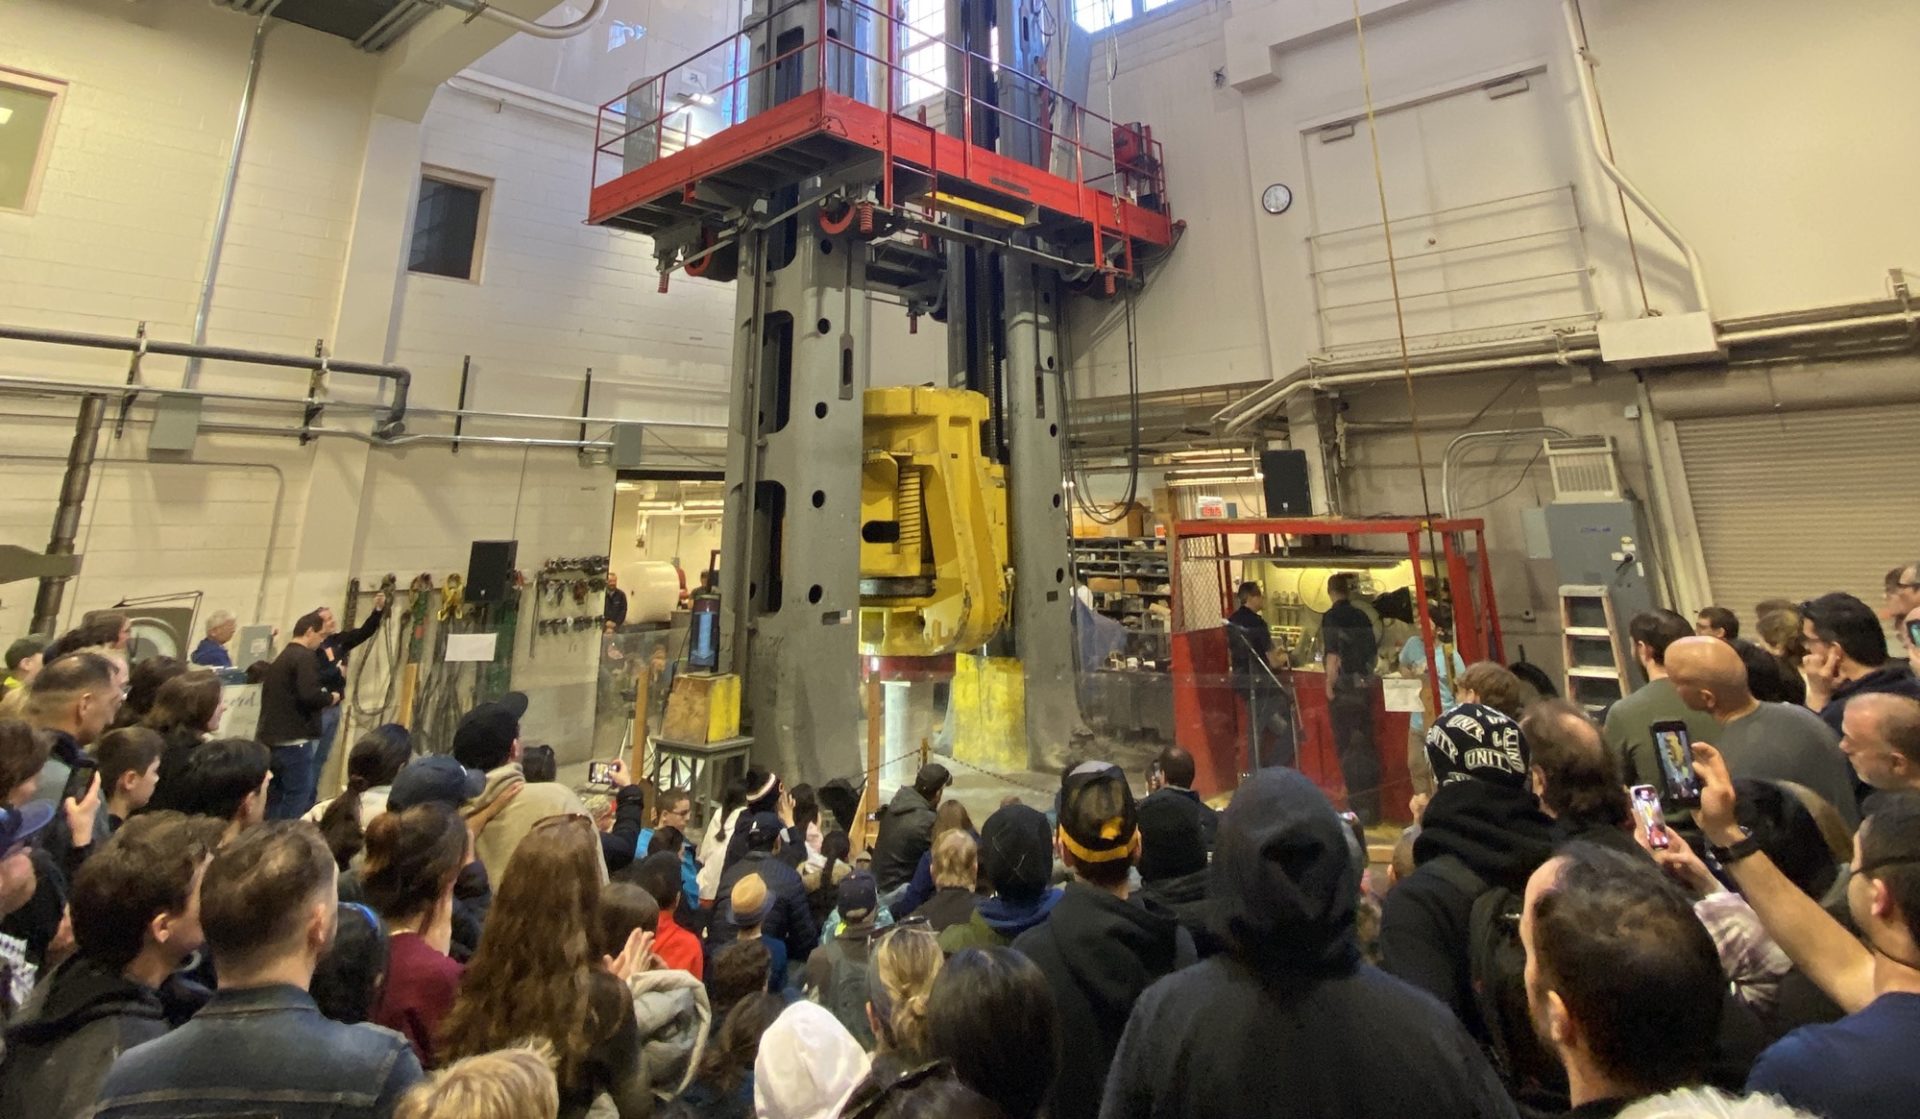 A concrete slab being crushed by a pressure machine two-stories tall, surrounded by a crowd of people